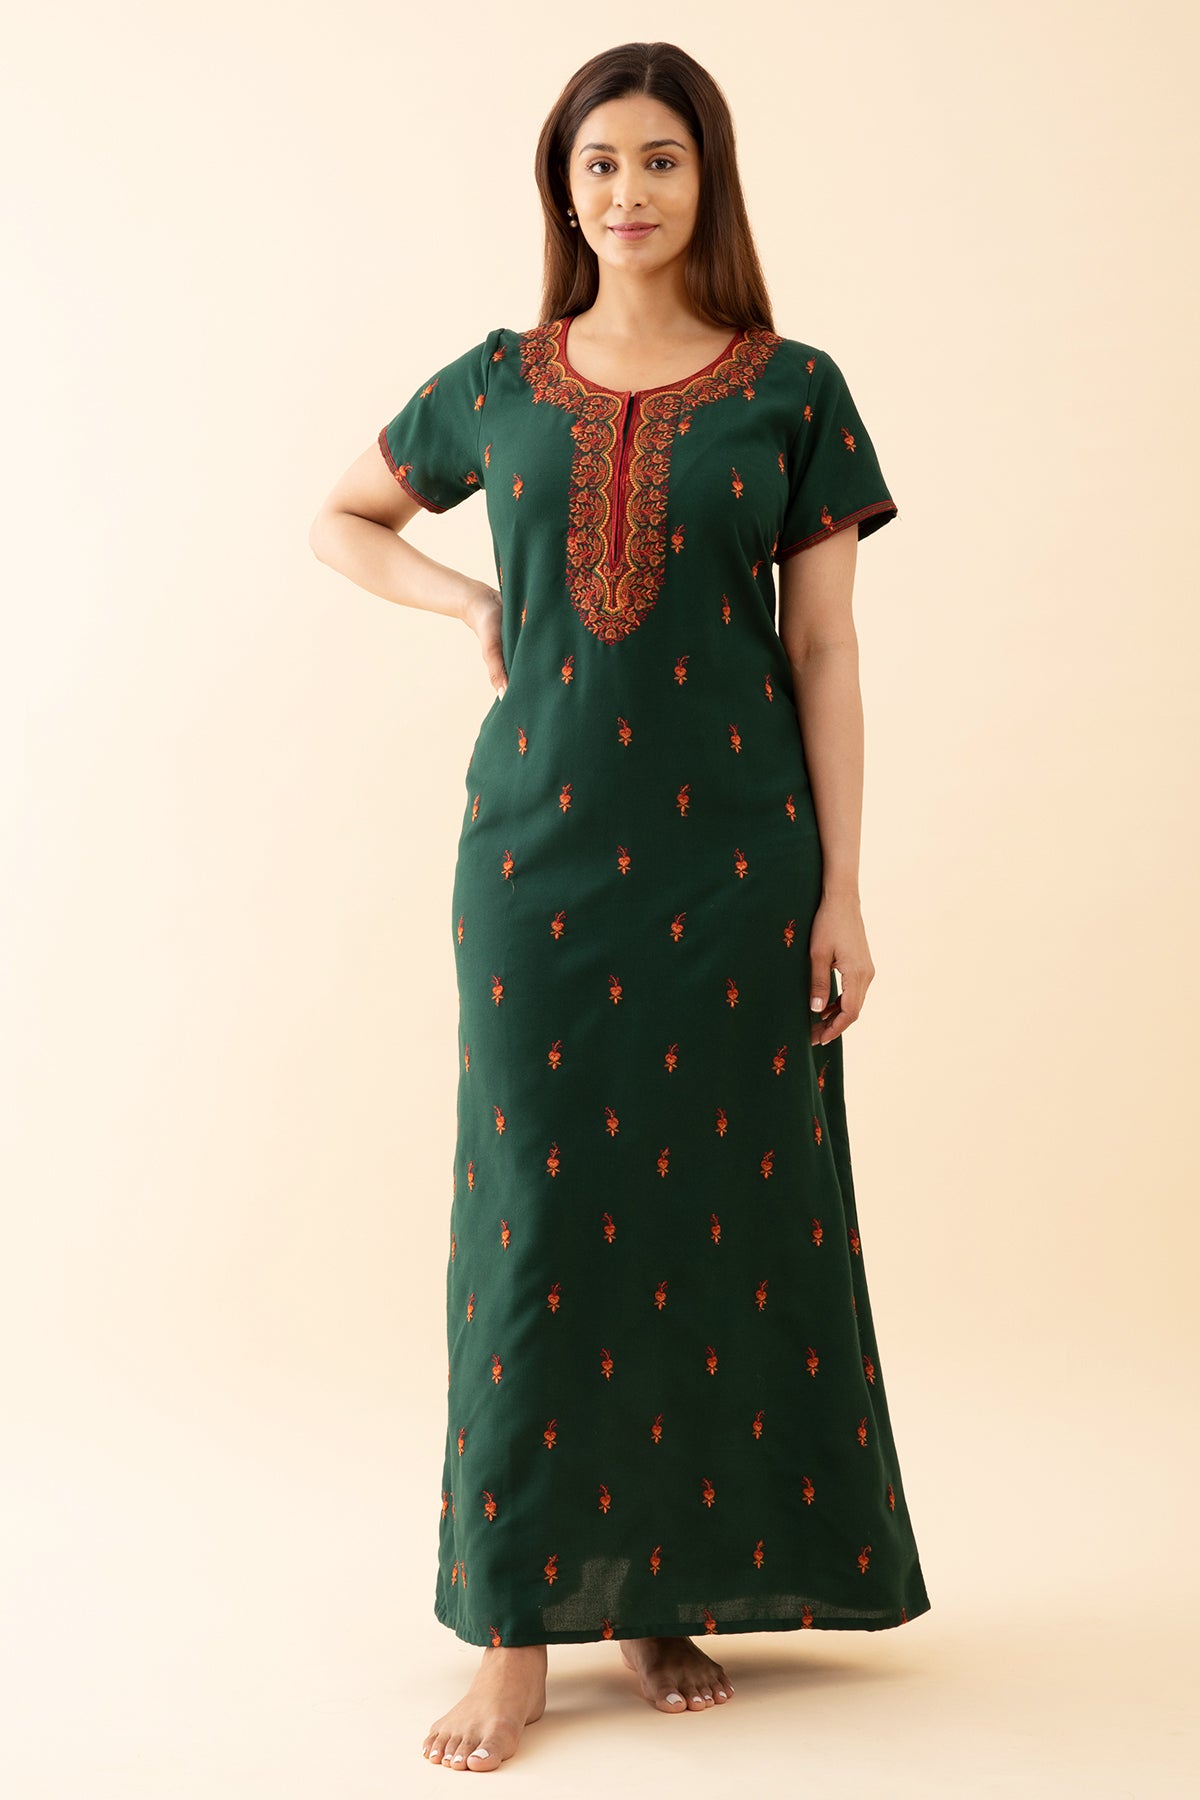 Solid With Contrast Whimsical Garden Embroidered Yoke - Green